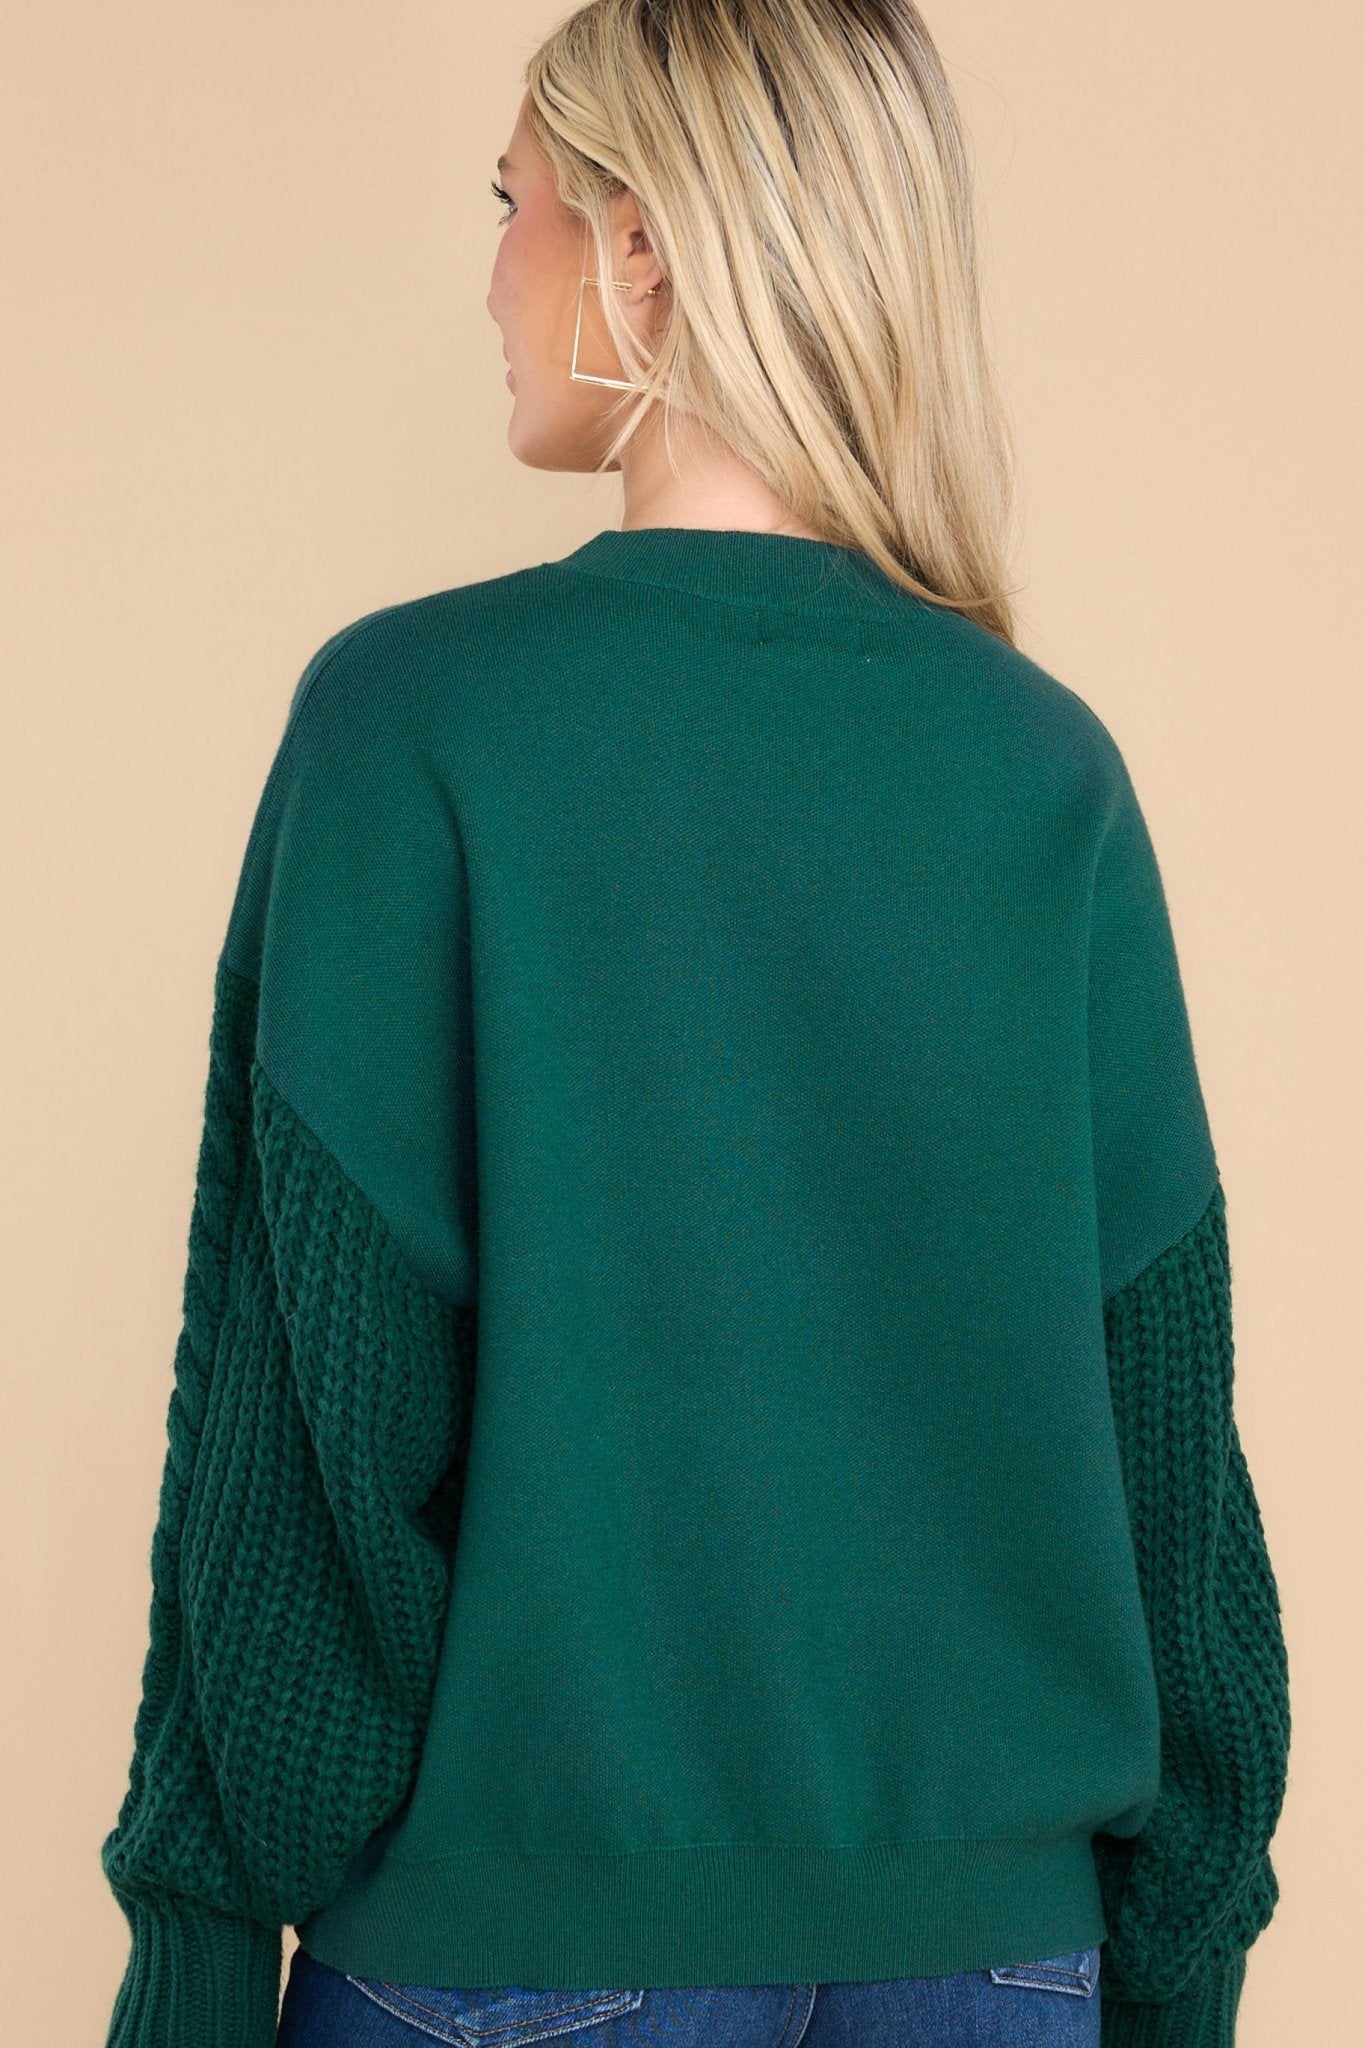 All Of My Love Hunter Green Sweater - Red Dress